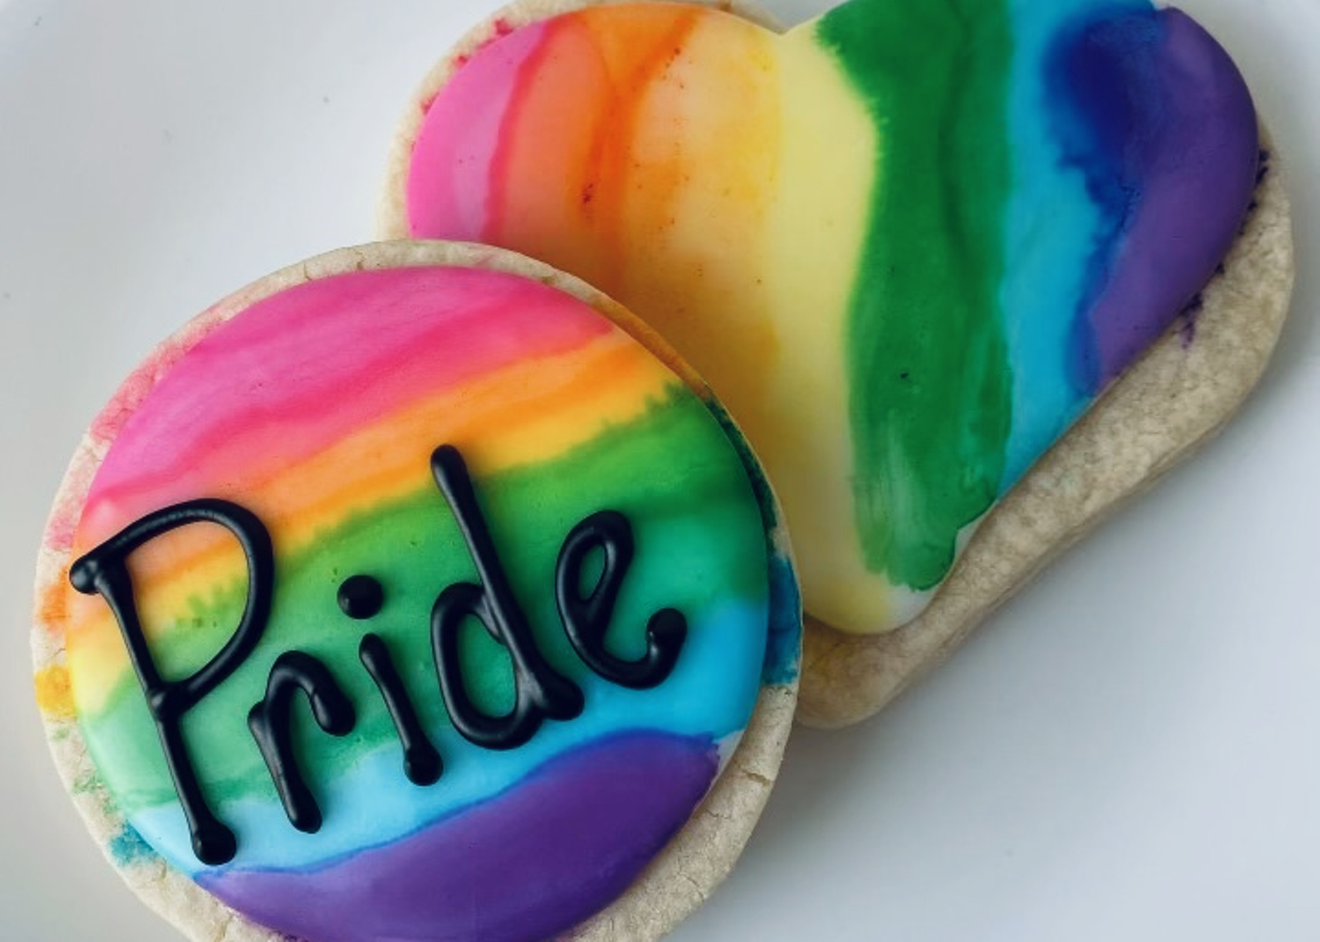 Hive Bakery is Flower Mound will celebrate Pride Month.